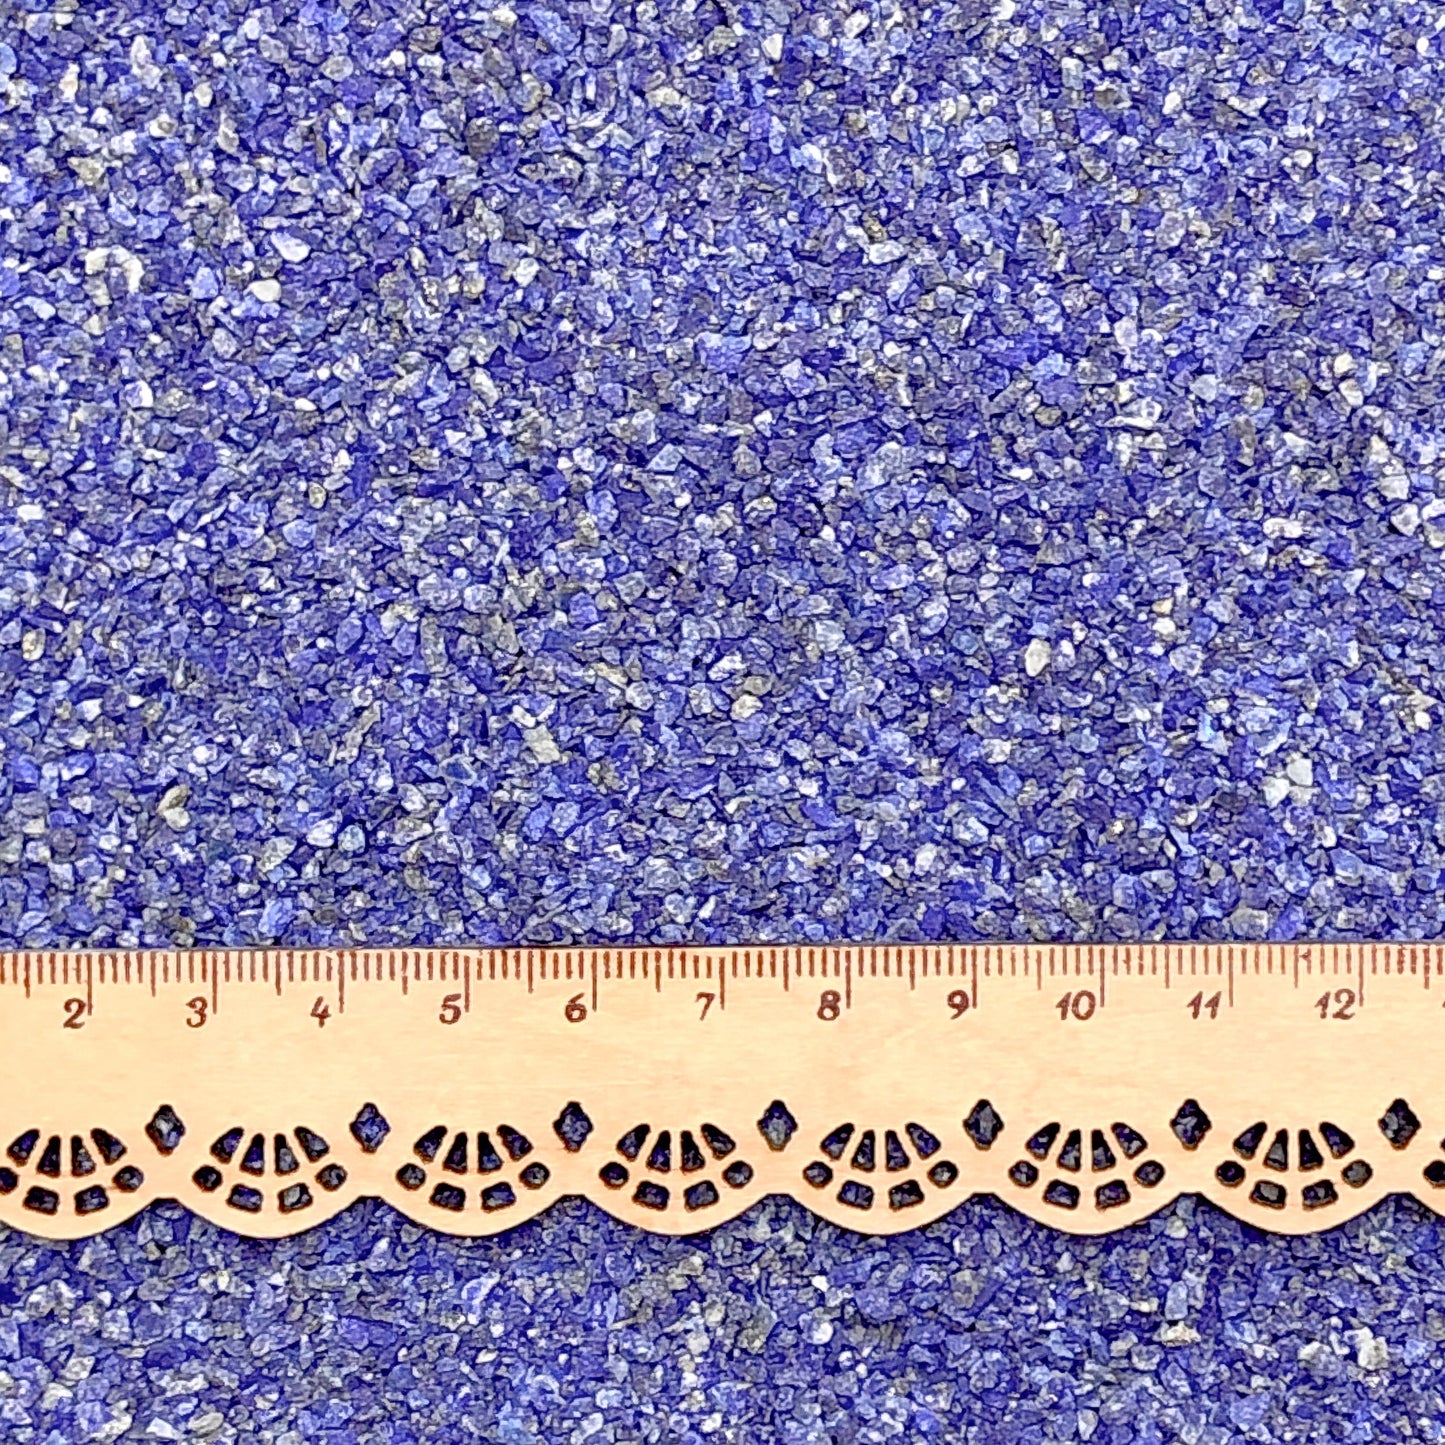 Crushed Royal Blue Lapis Lazuli (Grade AA) from Afghanistan, Medium Crush, Sand Size, 2mm - 0.25mm